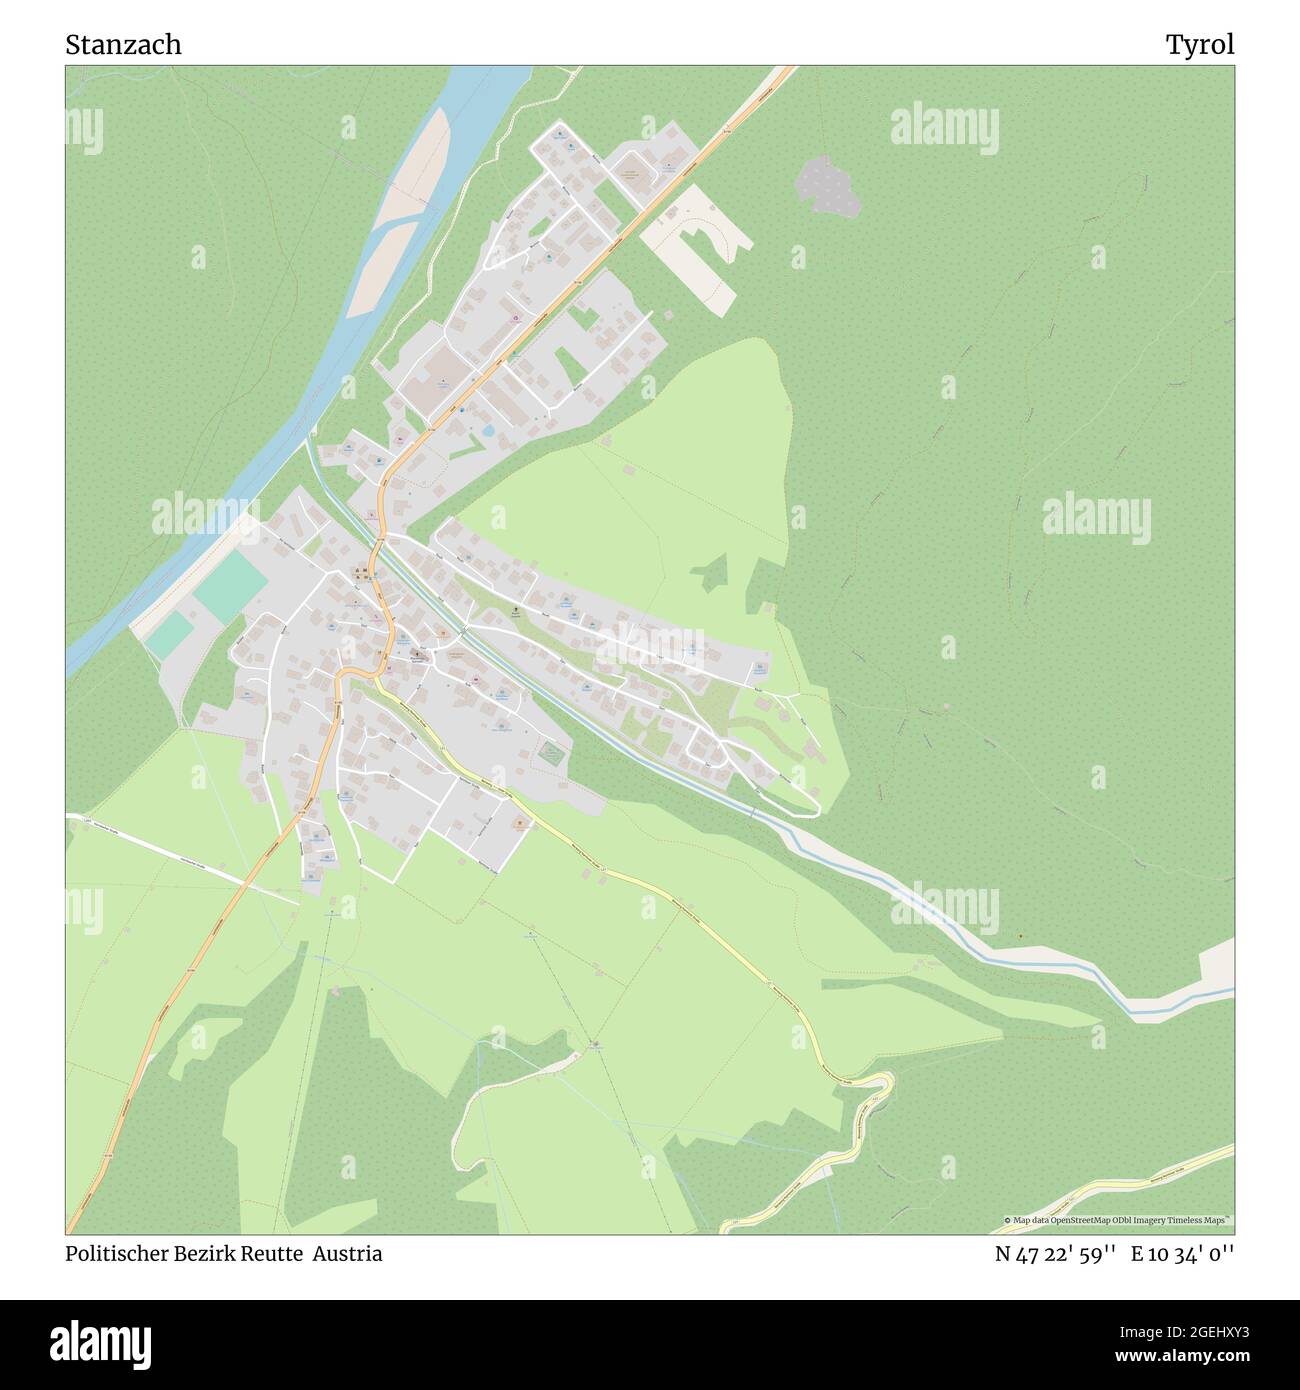 Stanzach, Politischer Bezirk Reutte, Austria, Tyrol, N 47 22' 59'', E 10 34' 0'', map, Timeless Map published in 2021. Travelers, explorers and adventurers like Florence Nightingale, David Livingstone, Ernest Shackleton, Lewis and Clark and Sherlock Holmes relied on maps to plan travels to the world's most remote corners, Timeless Maps is mapping most locations on the globe, showing the achievement of great dreams Stock Photo